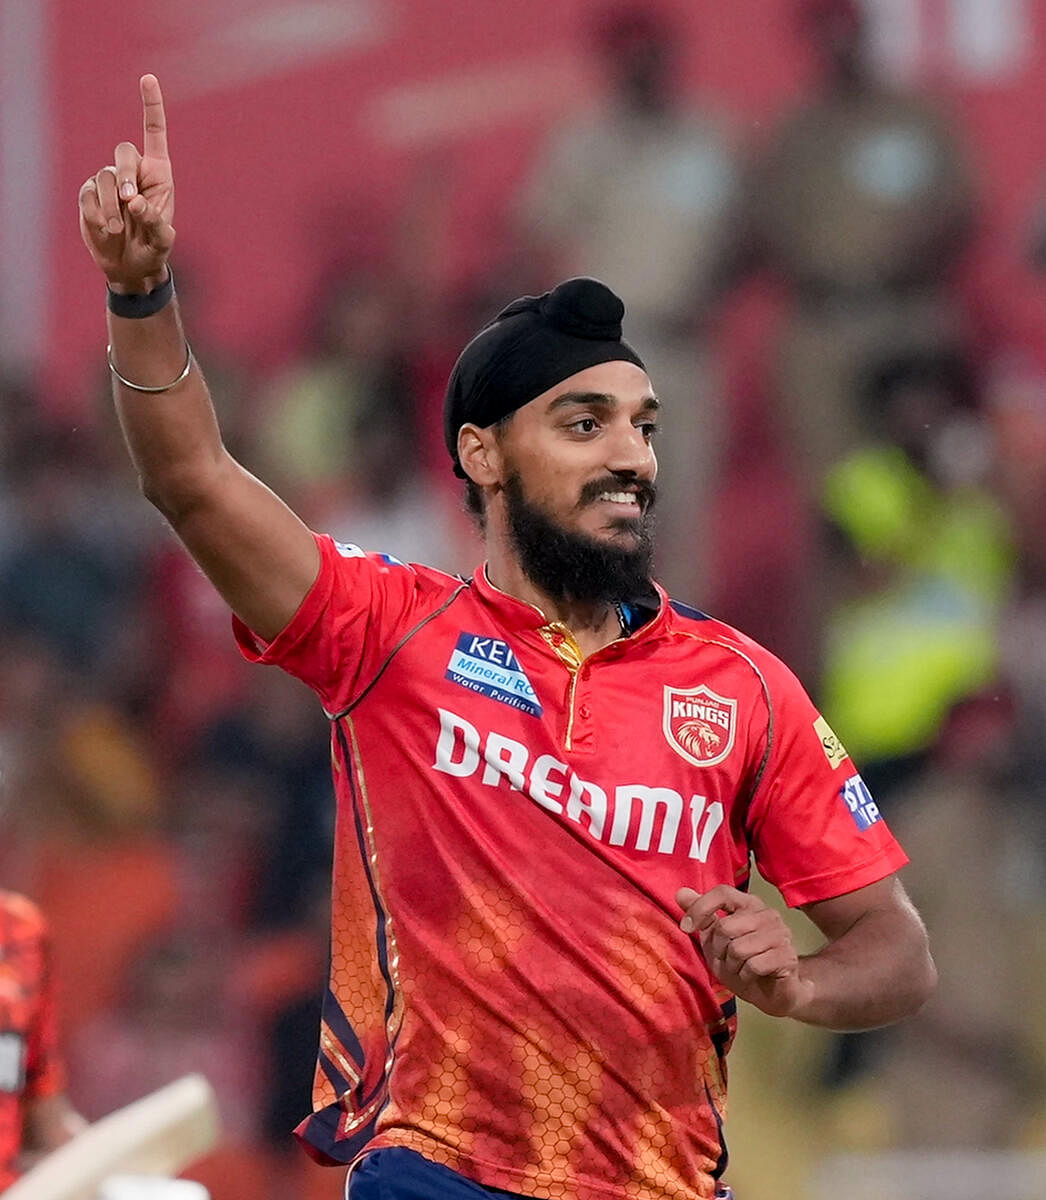 Punjab Kings bowler Arshdeep Singh has been having a good IPL season with 8 wickets in five matches. He is fifth among this season's highest wicket-takers so far.